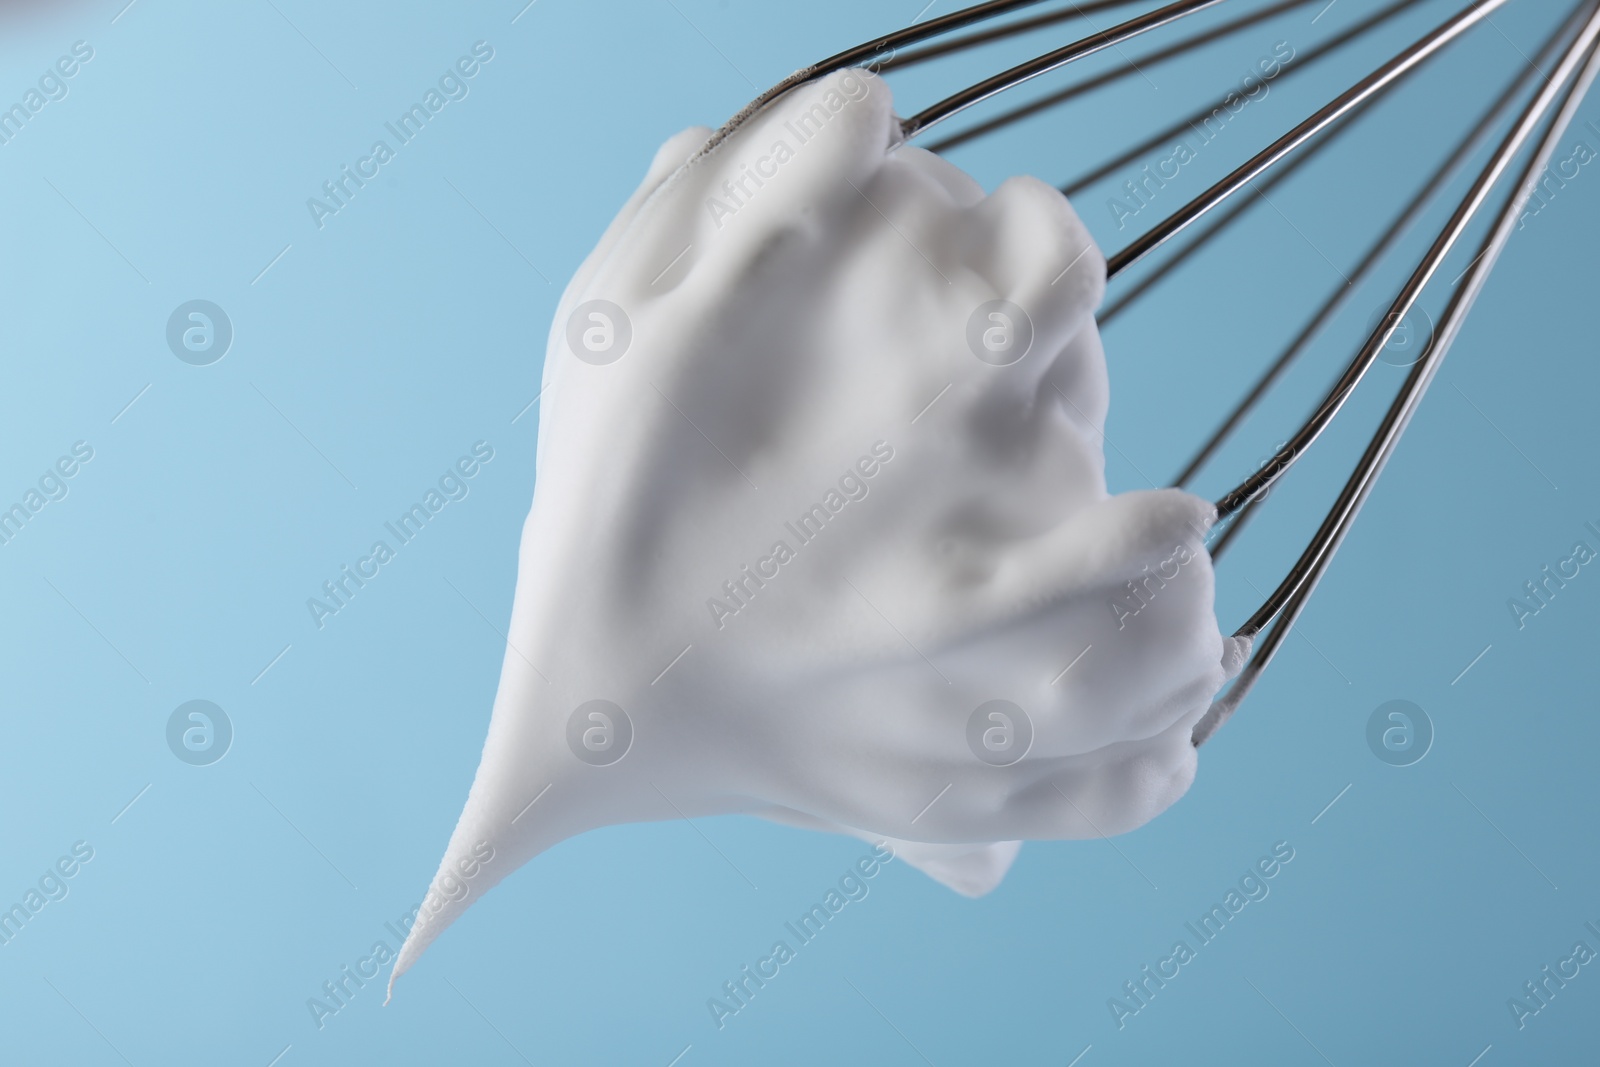 Photo of Whisk with whipped cream on light blue background, closeup